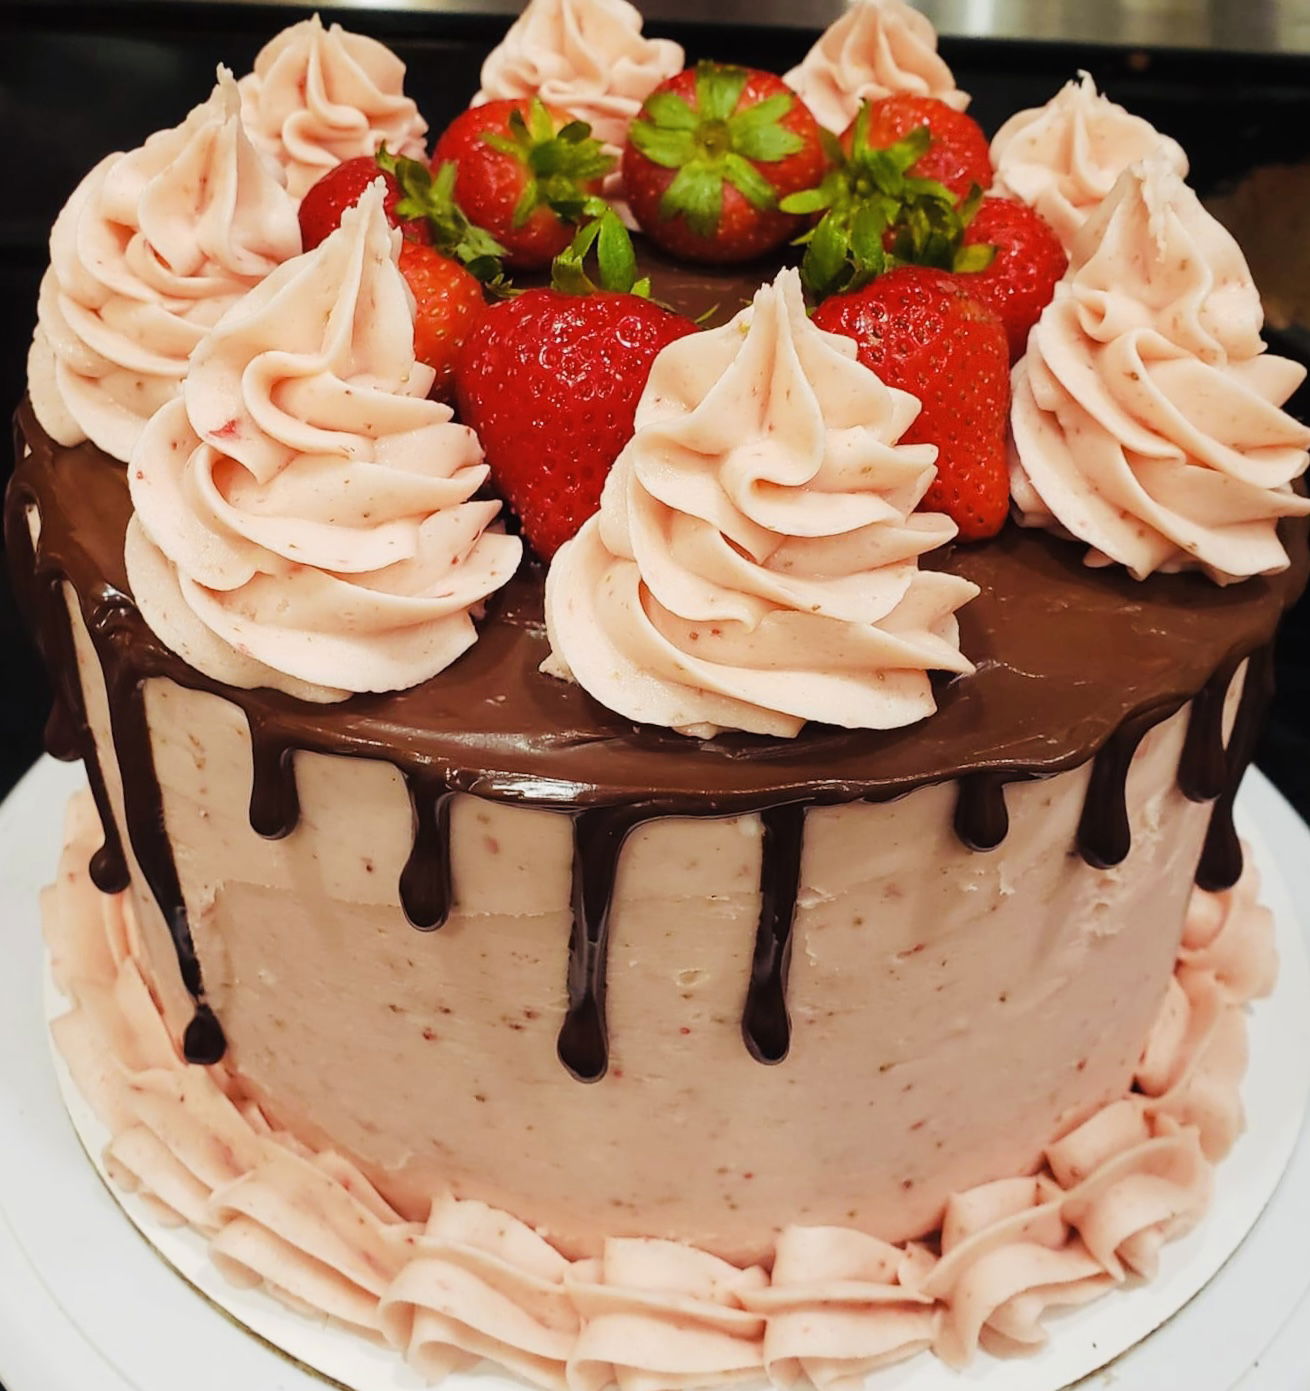 2 Layer Strawberry Cake with Buttercream Frosting, Chocolate Ganache, and Fresh Strawberries